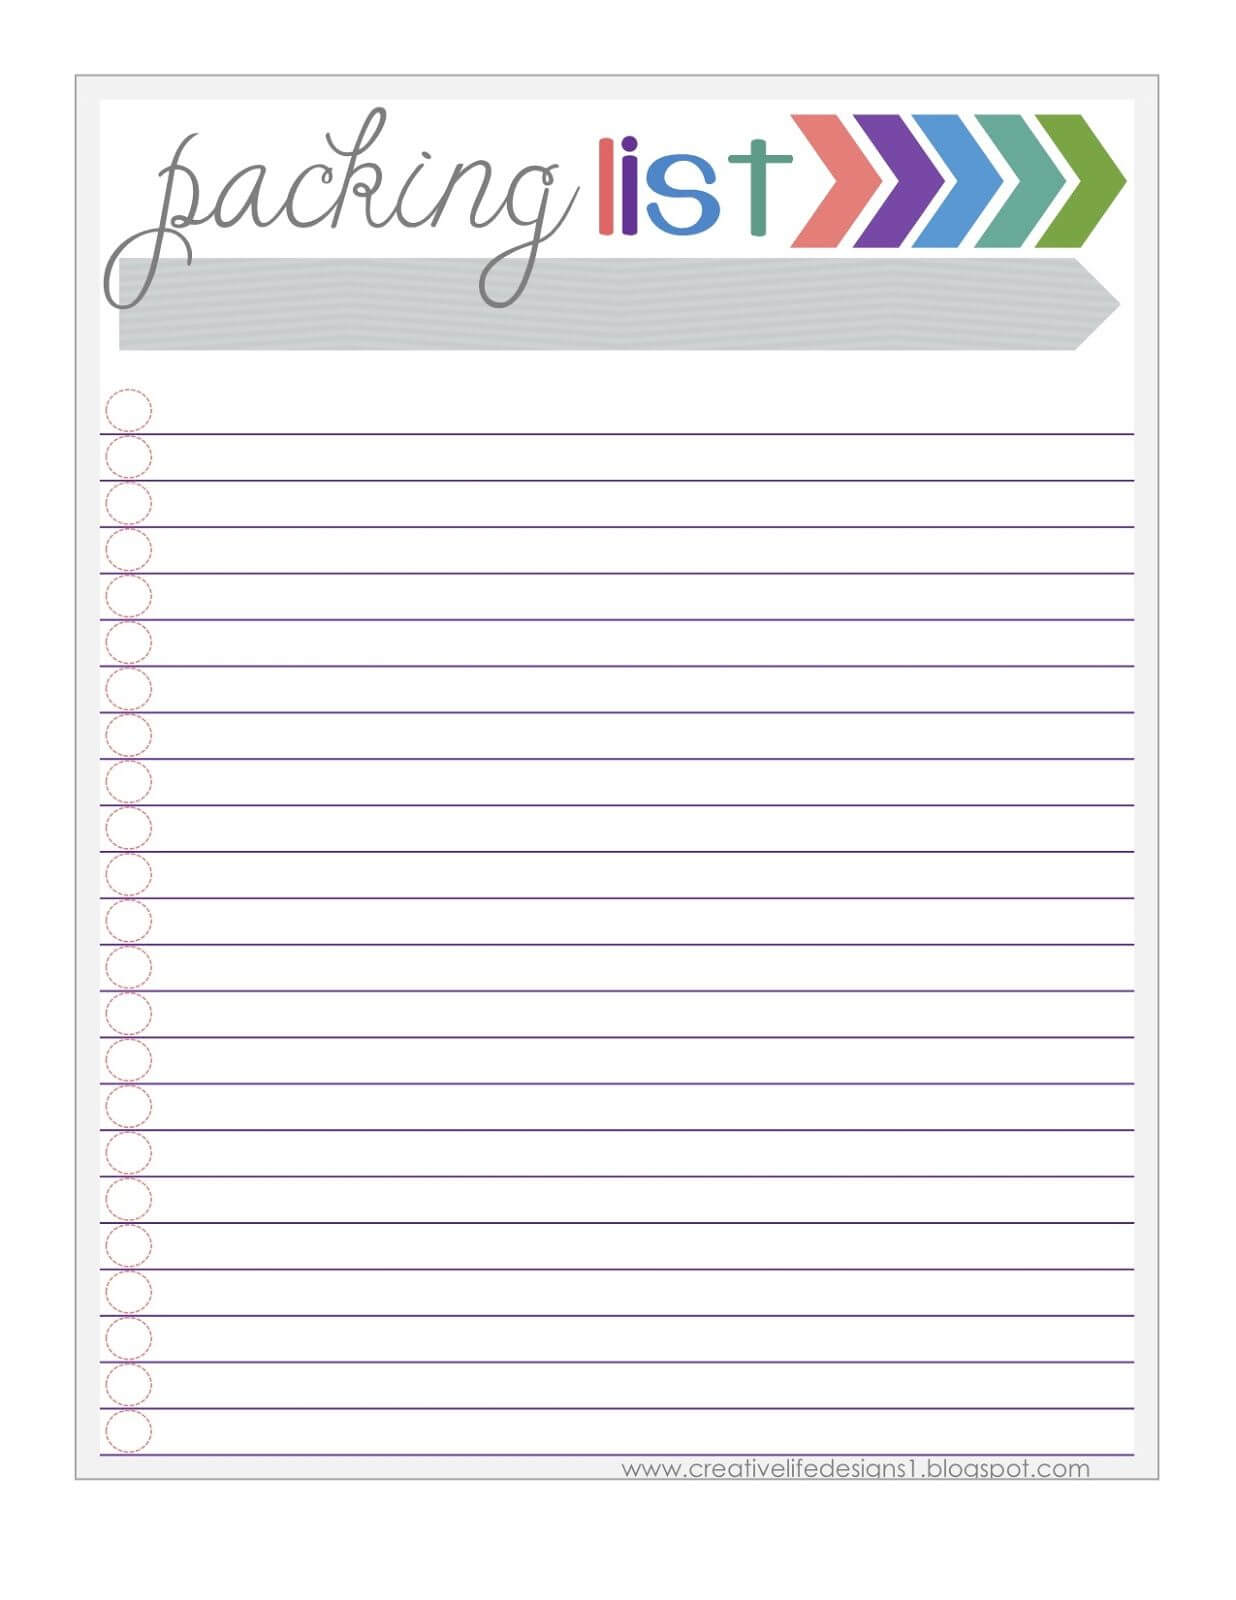 Free Packing List Printable Creative Life Designs | Packing In Blank Packing List Template